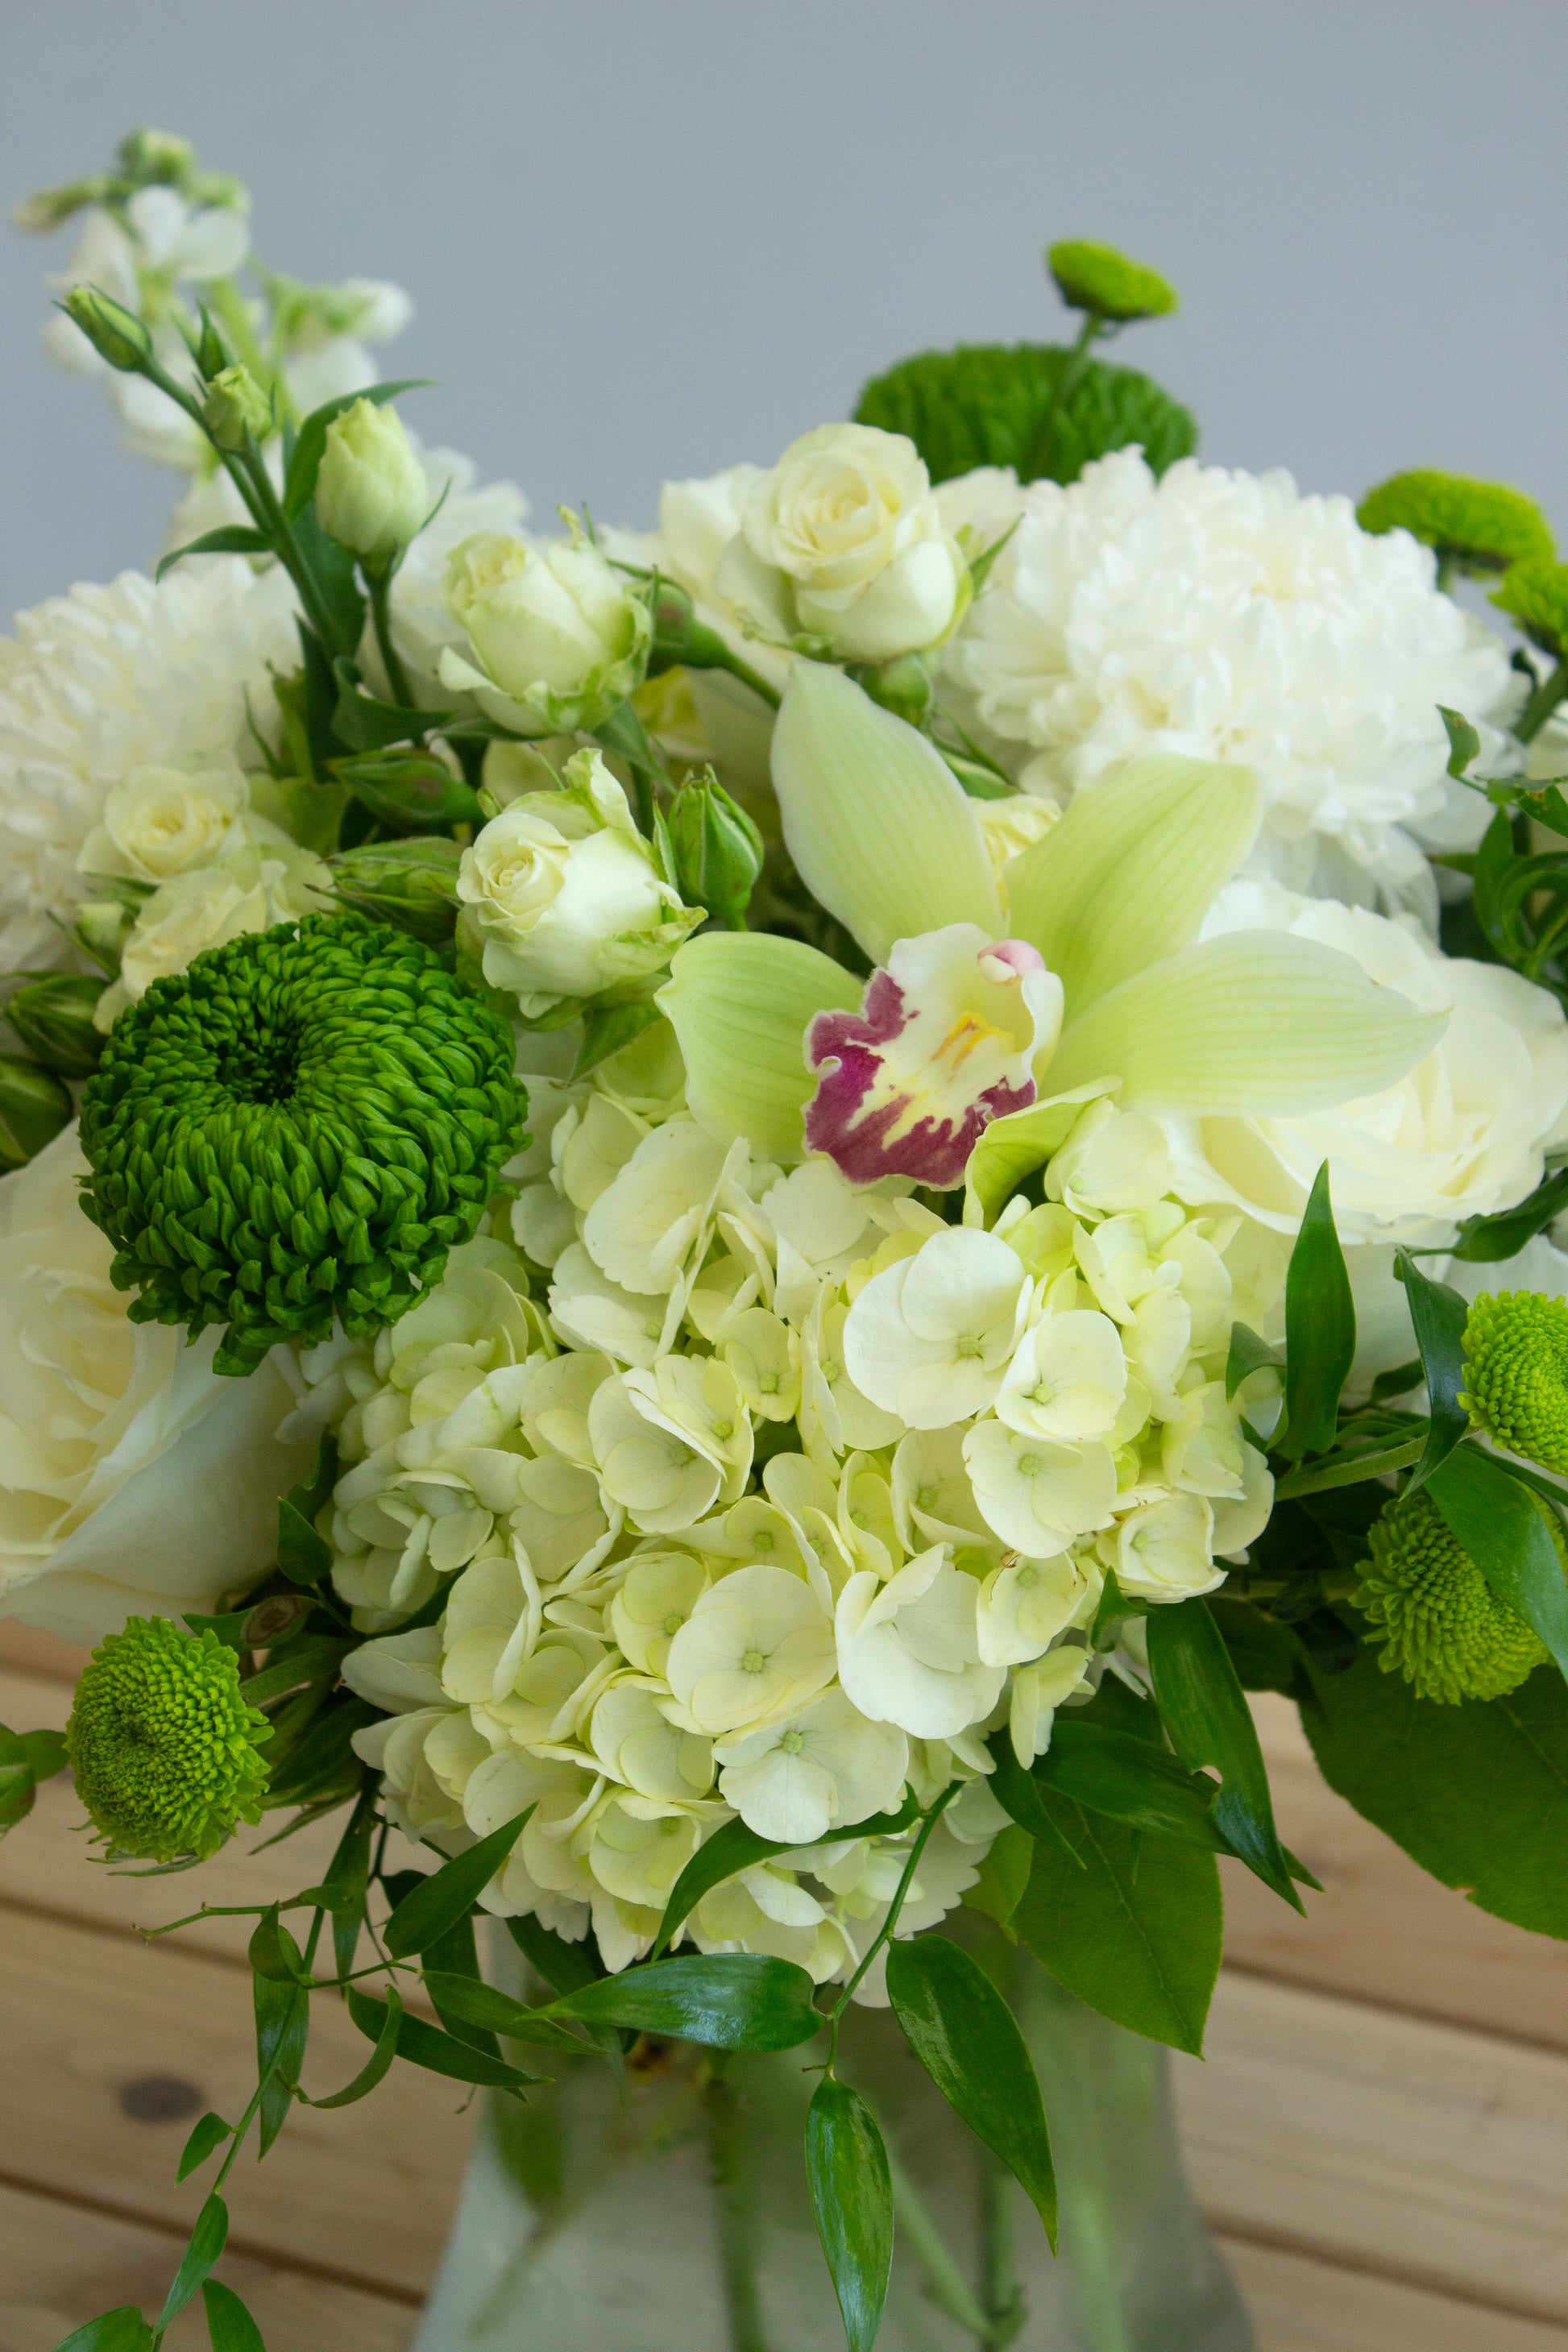 Closeup of white floral arrangement. Photography by Vibeke Silverthorne, 2023